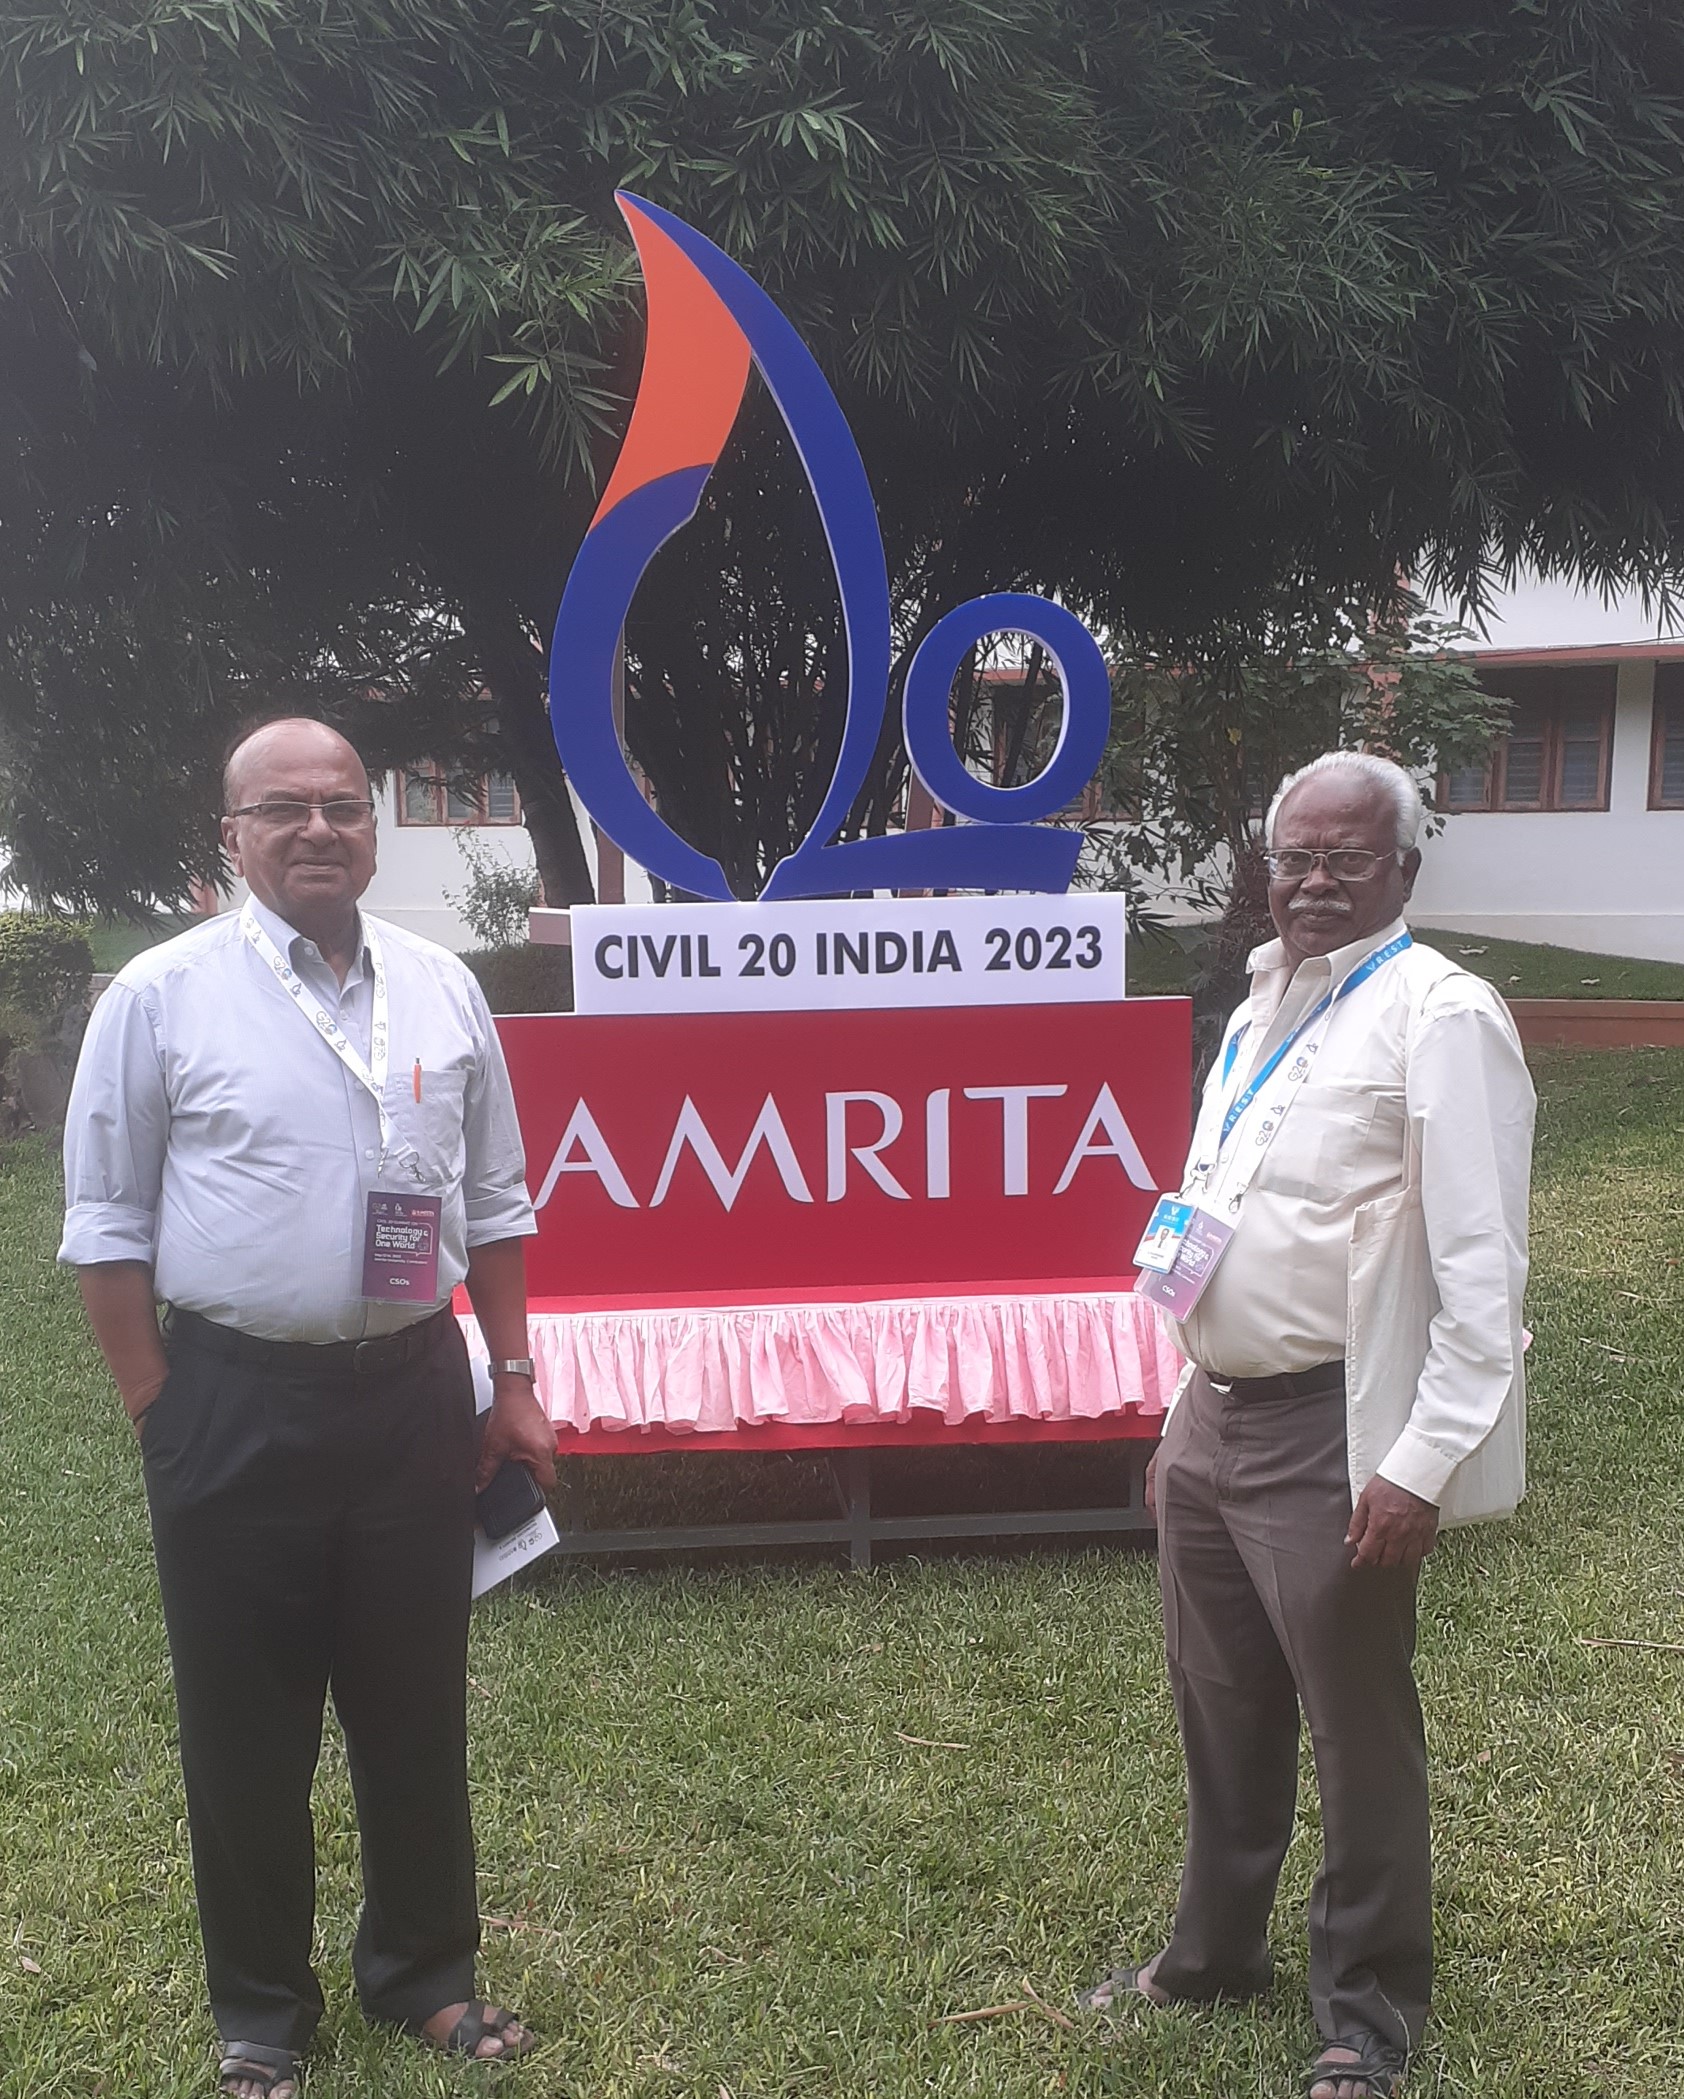 C20 – International Summit (Technology and Security for One World)- at Amrita School of Engineering Coimbatore, ON 13 th and 14th May 2023